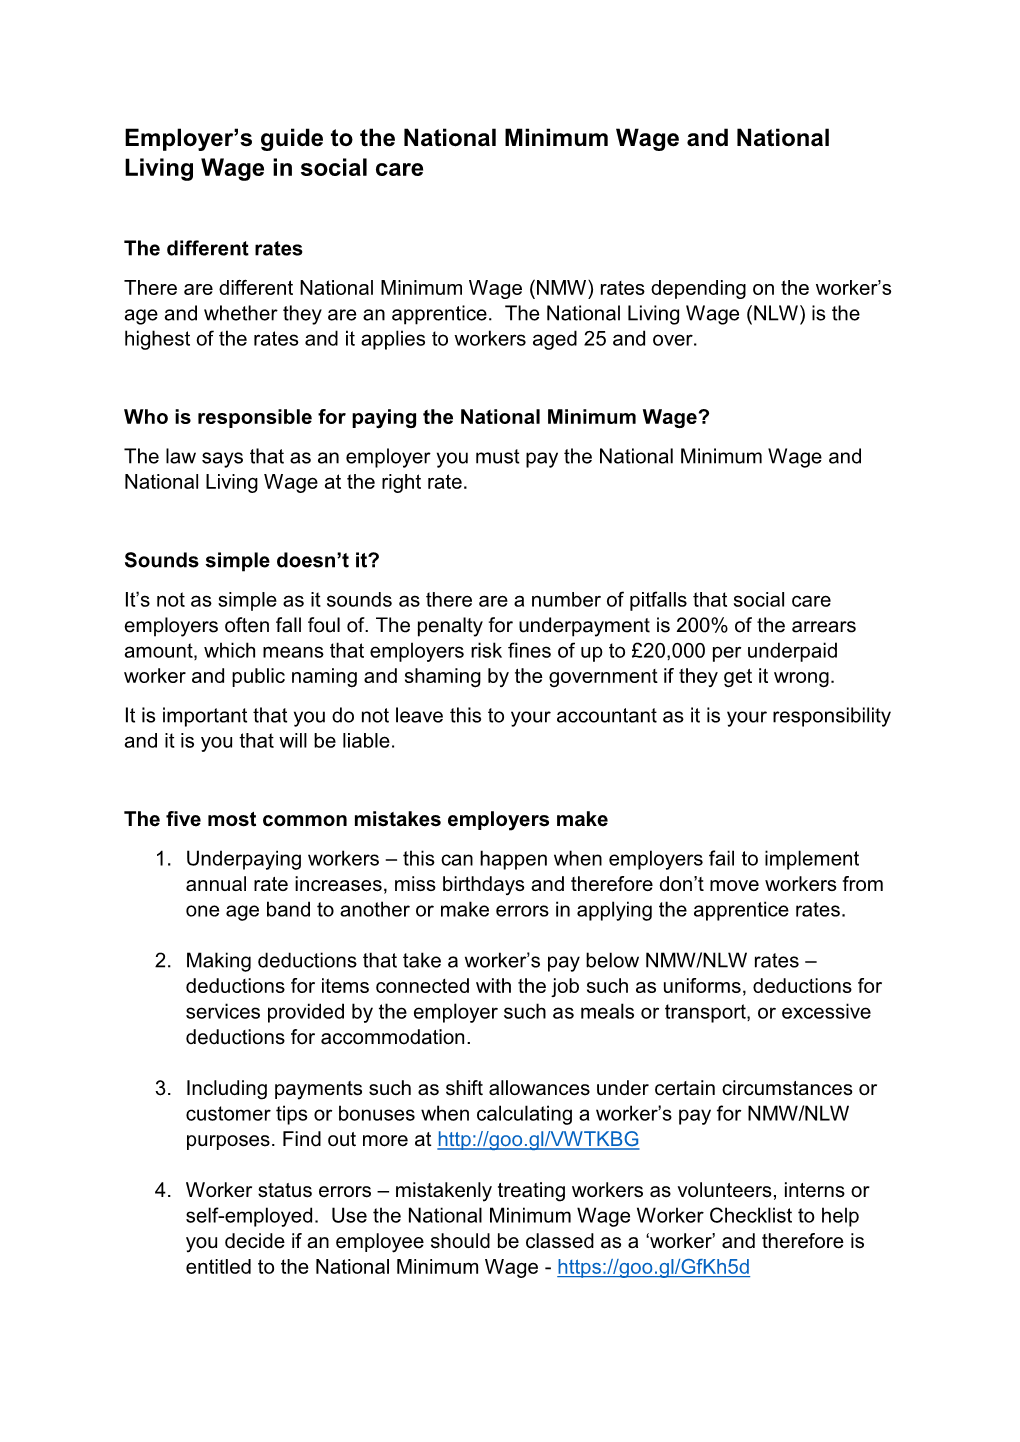 Employer's Guide to the National Minimum Wage and National Living